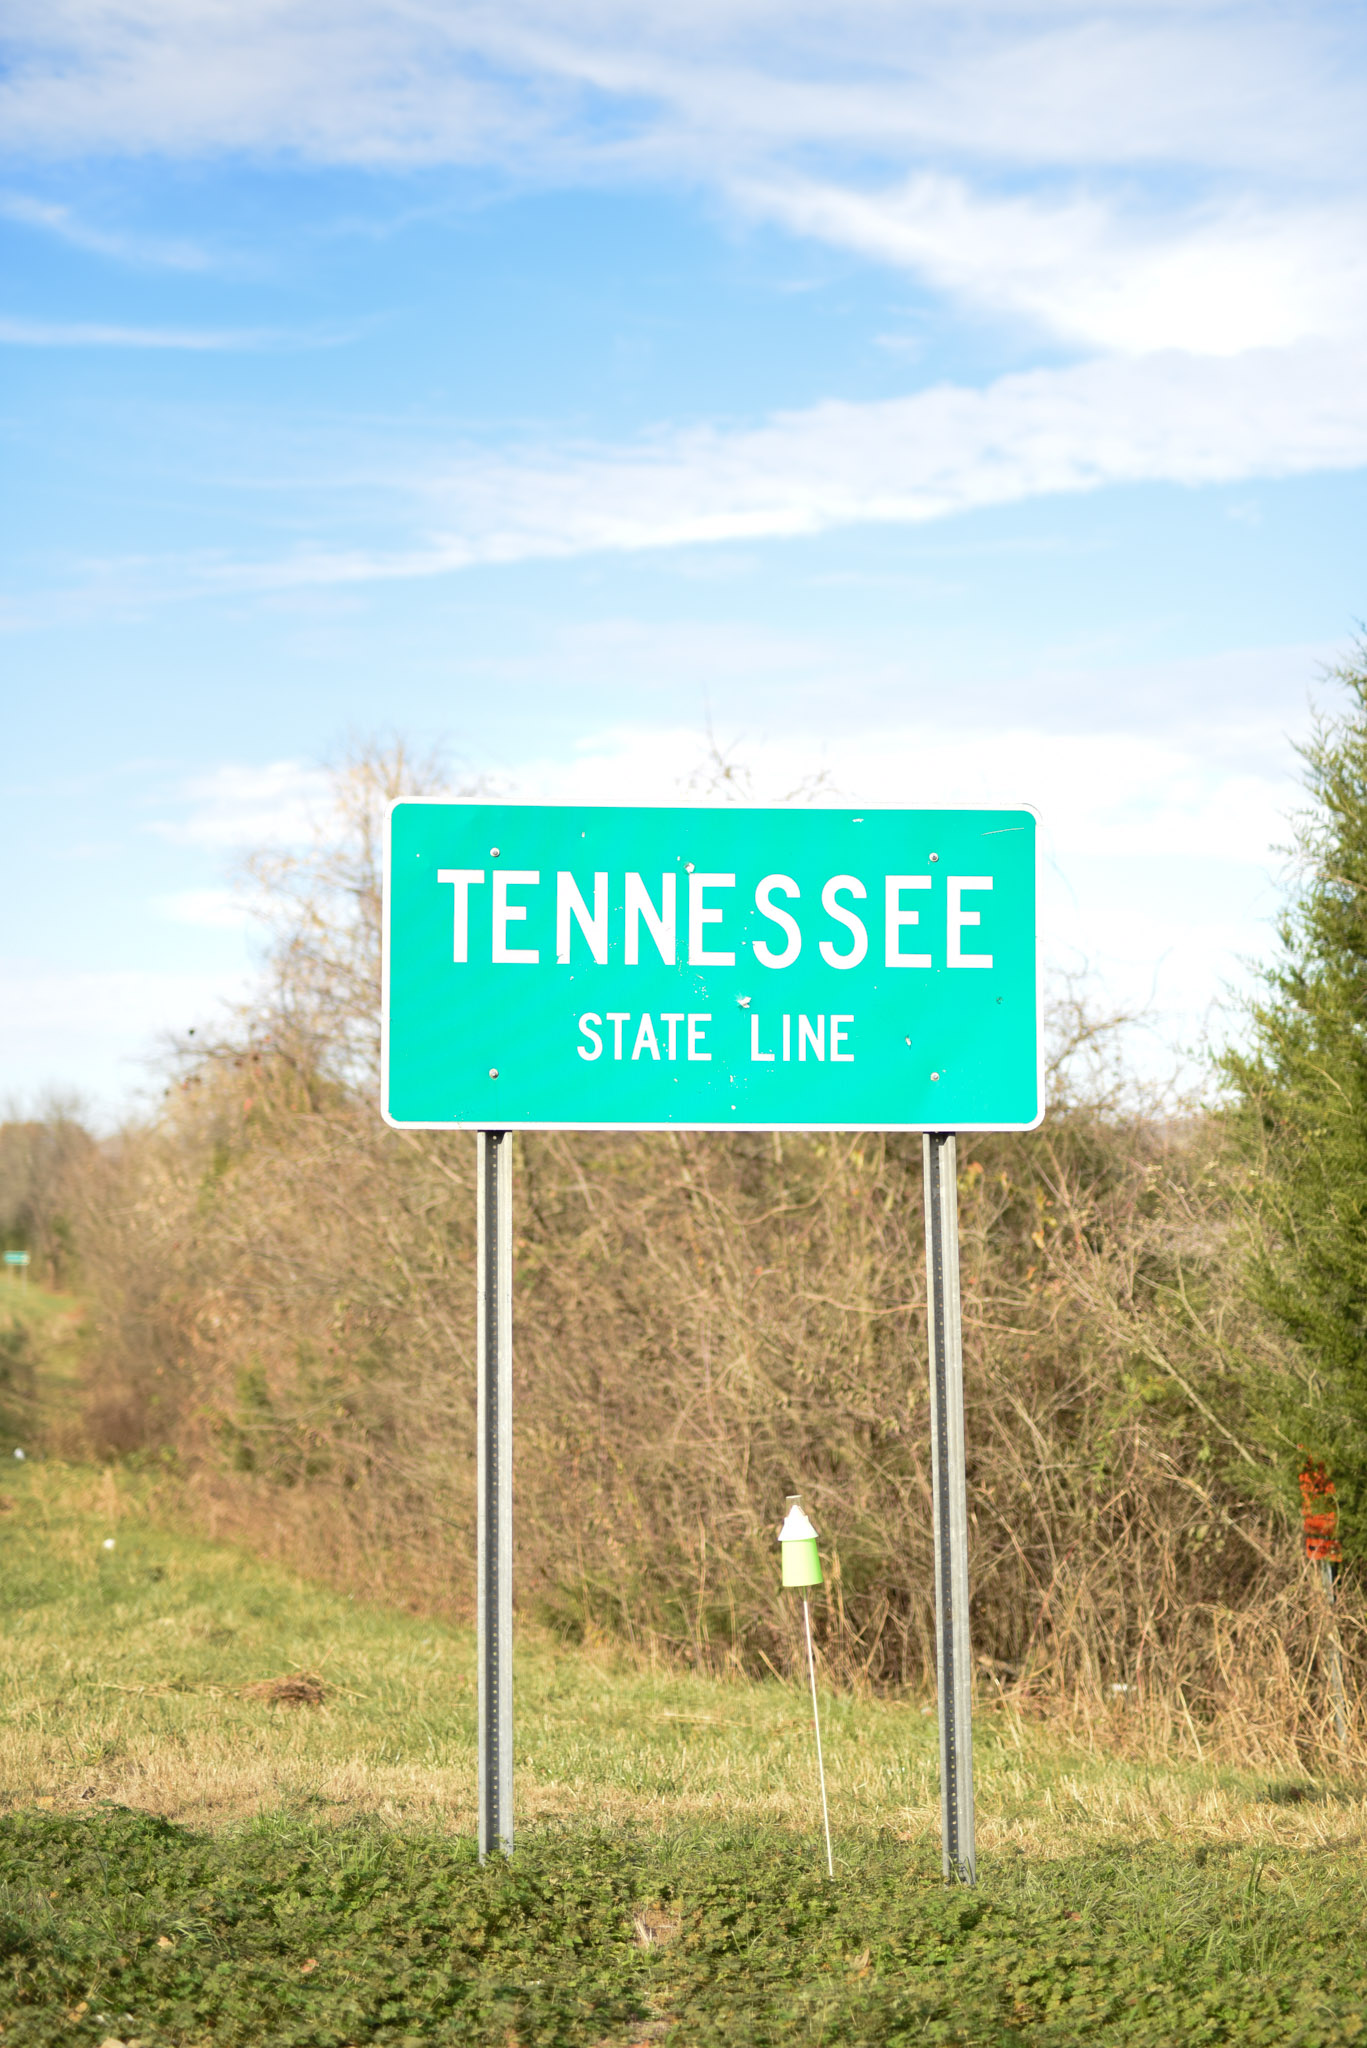 Tennessee welcom sign